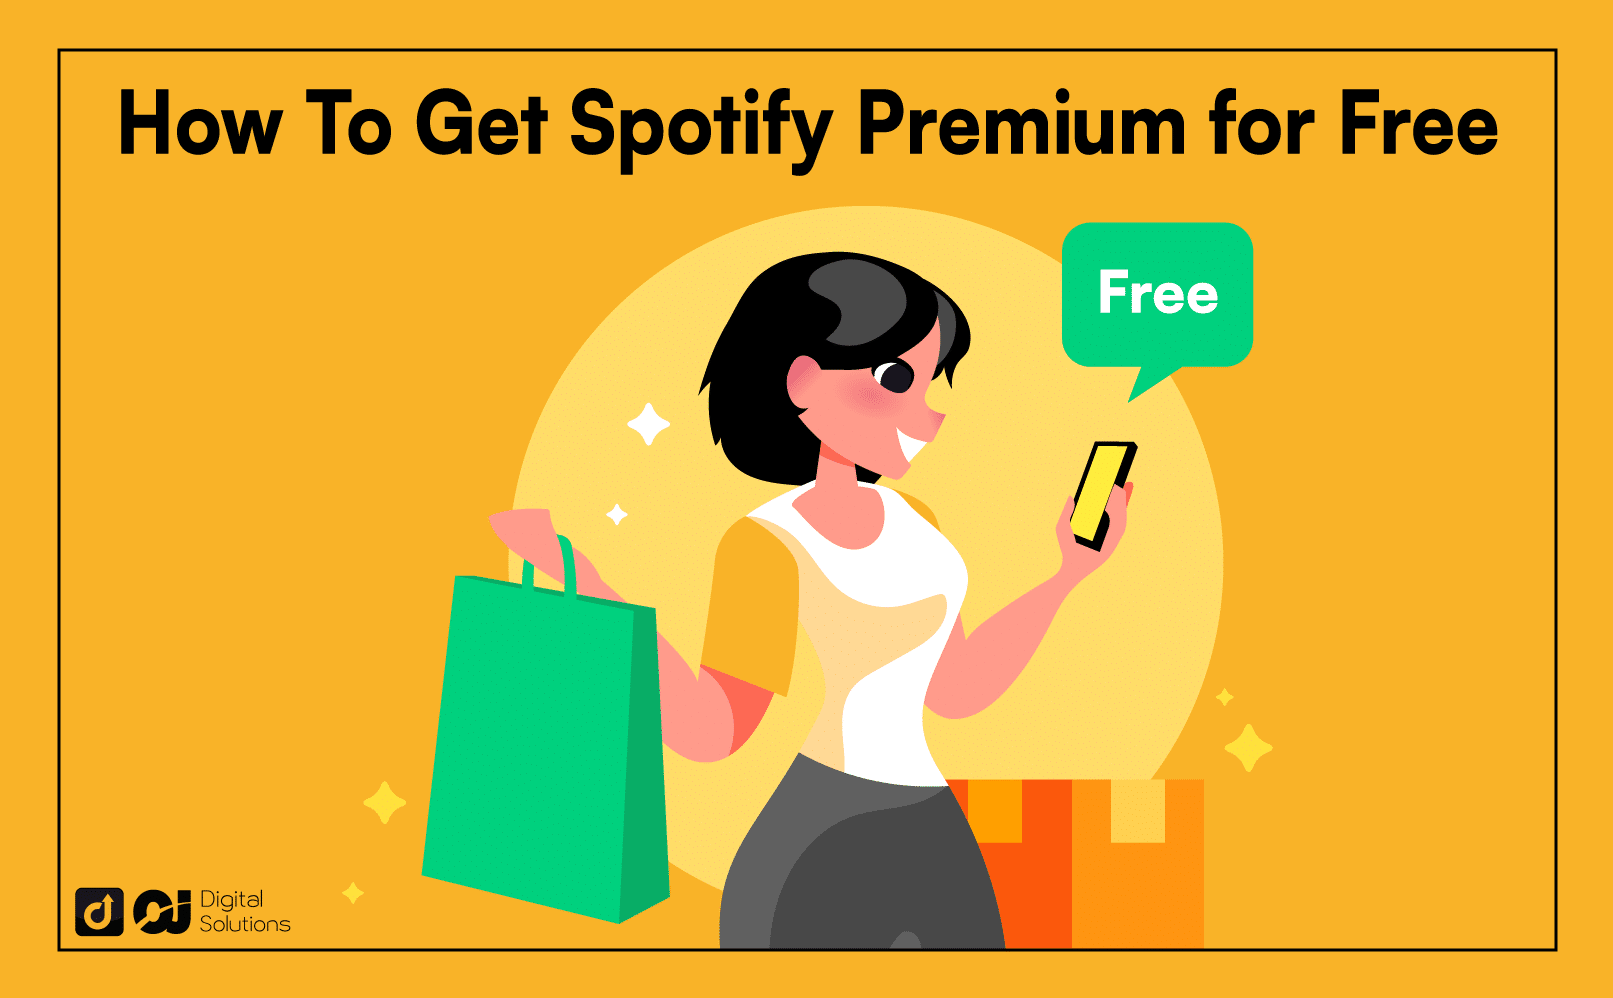 How To Get Spotify Premium for Free